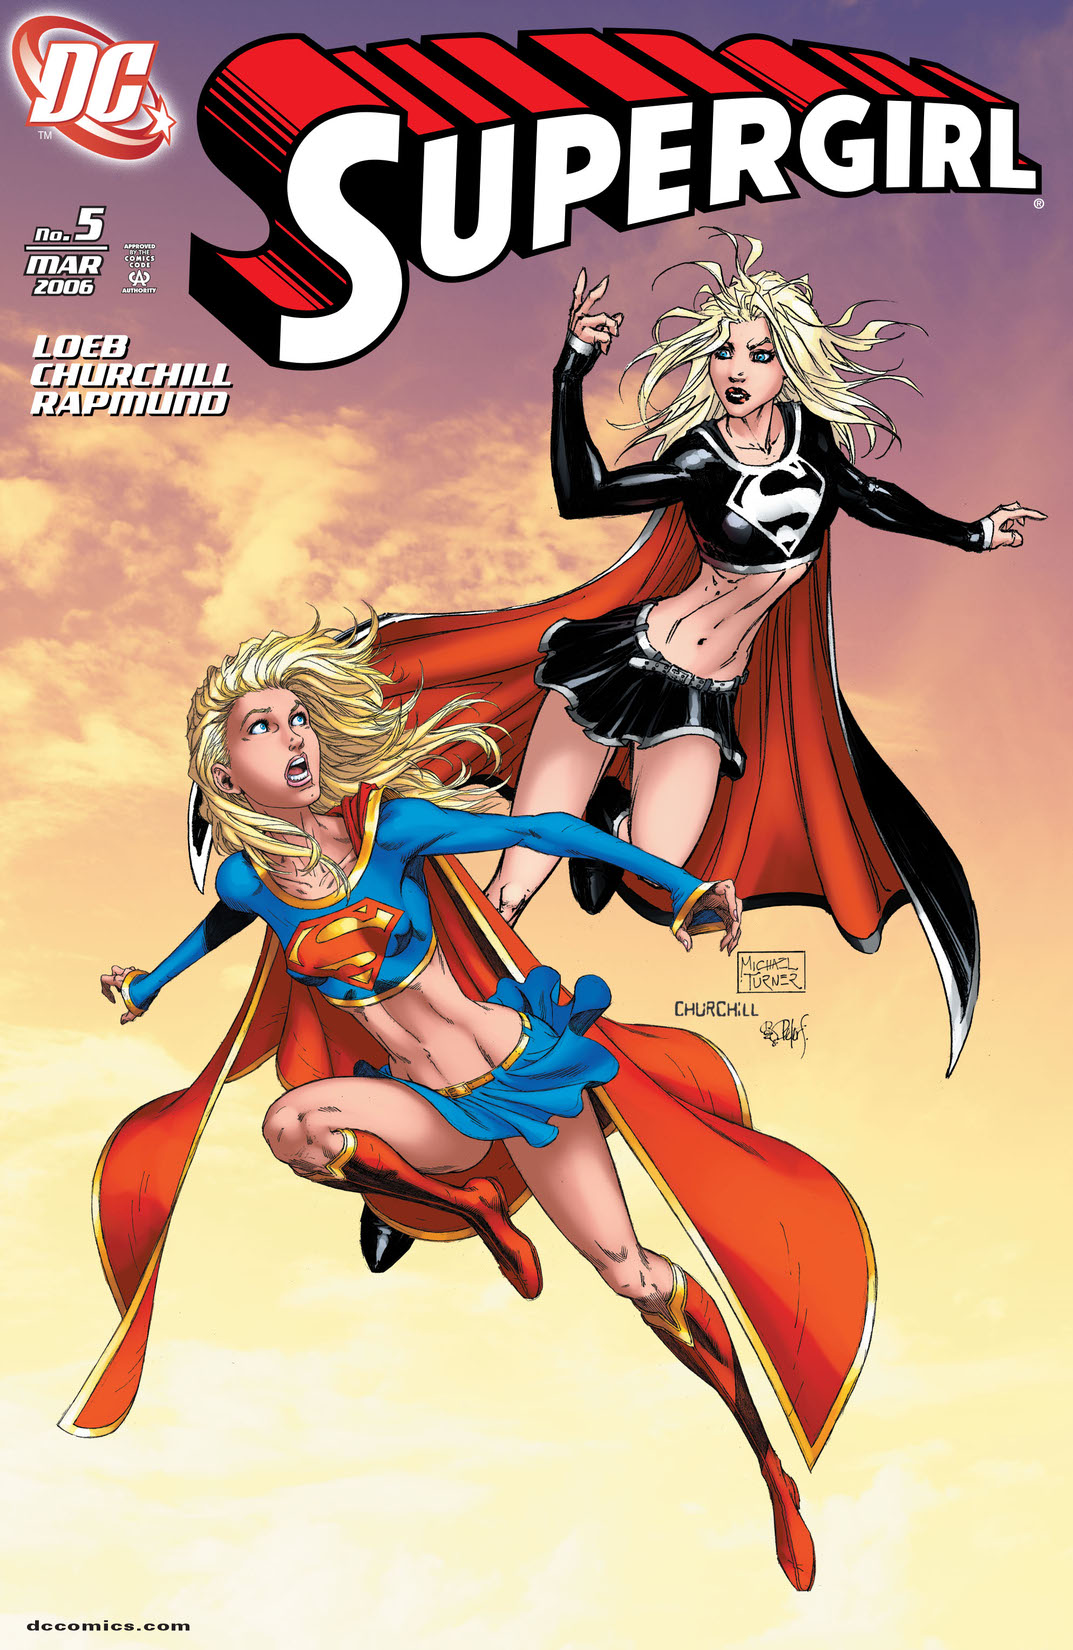 Supergirl (2005-) #5 preview images